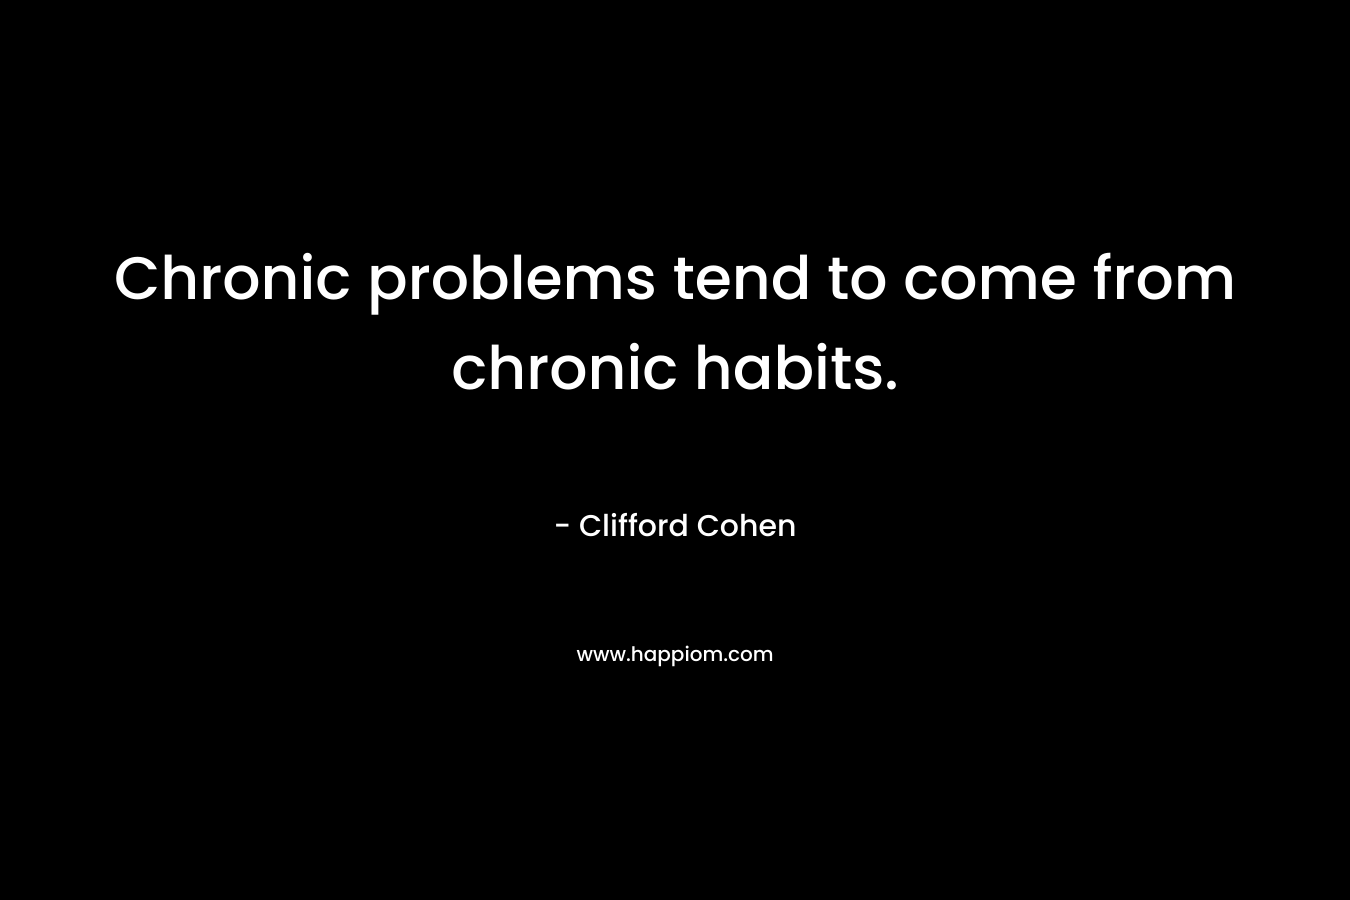 Chronic problems tend to come from chronic habits. – Clifford Cohen